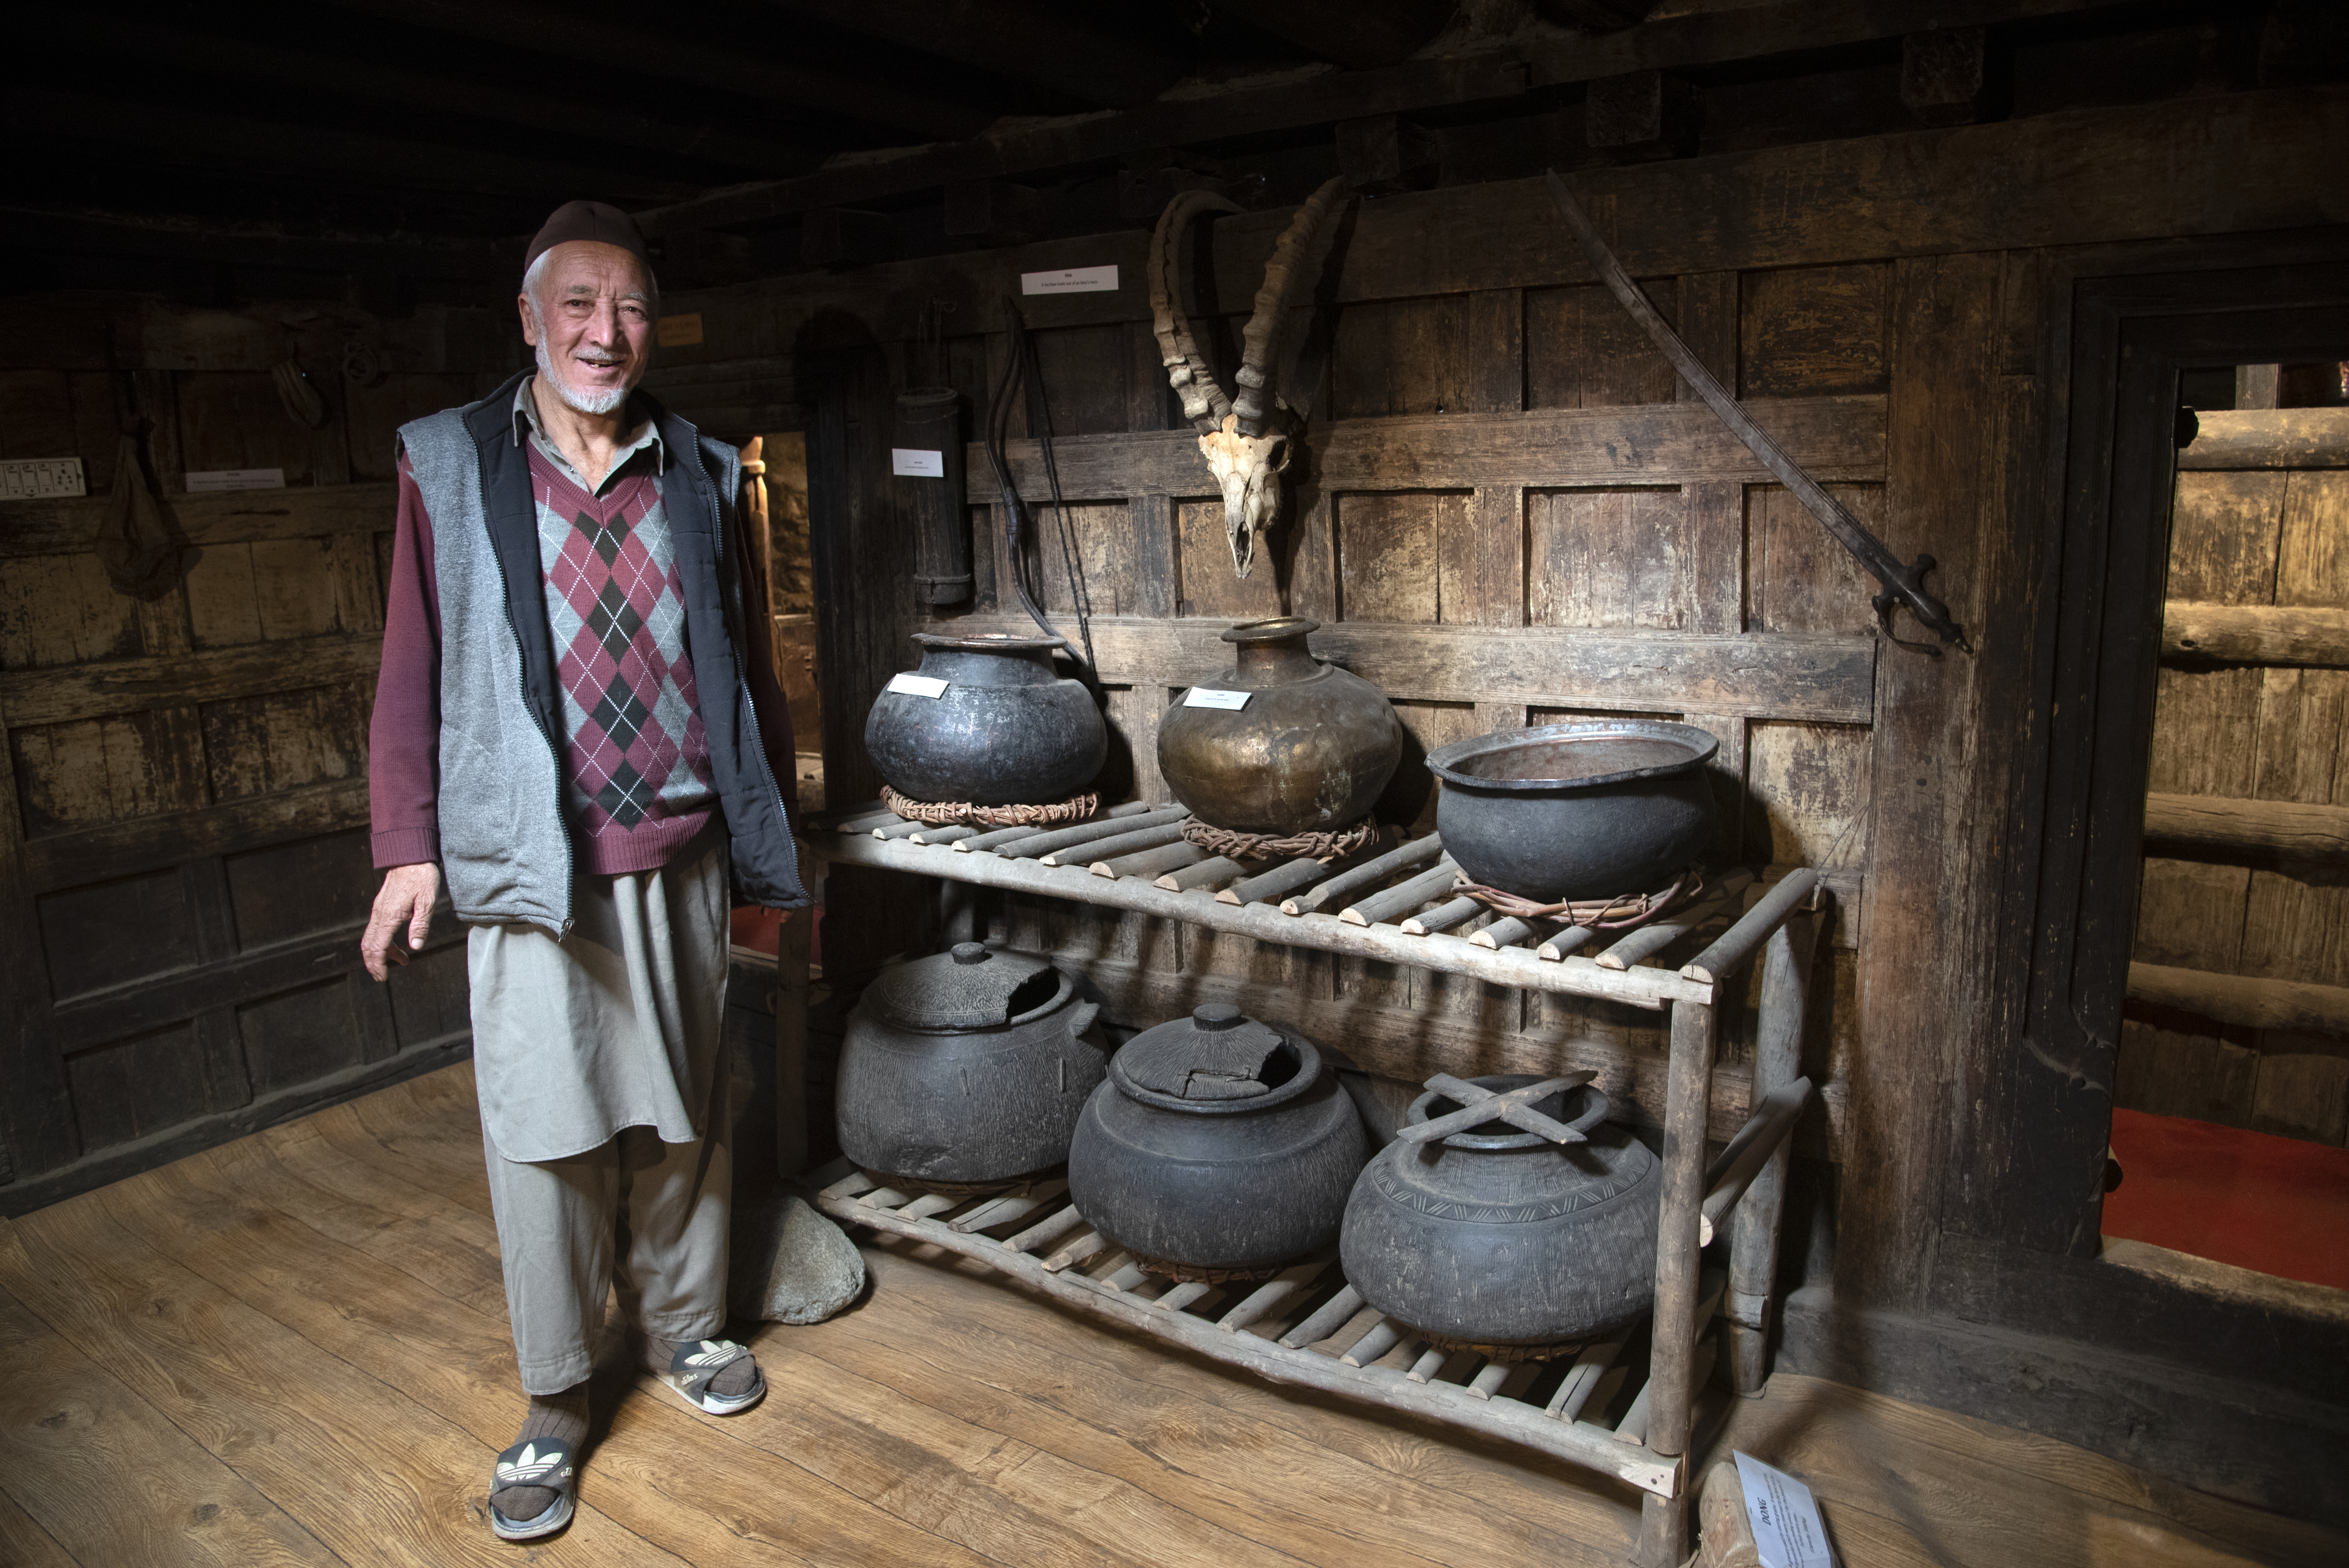 A man stands in front of a shelf holding cooking vessels (image: Sugato Mukherjee)